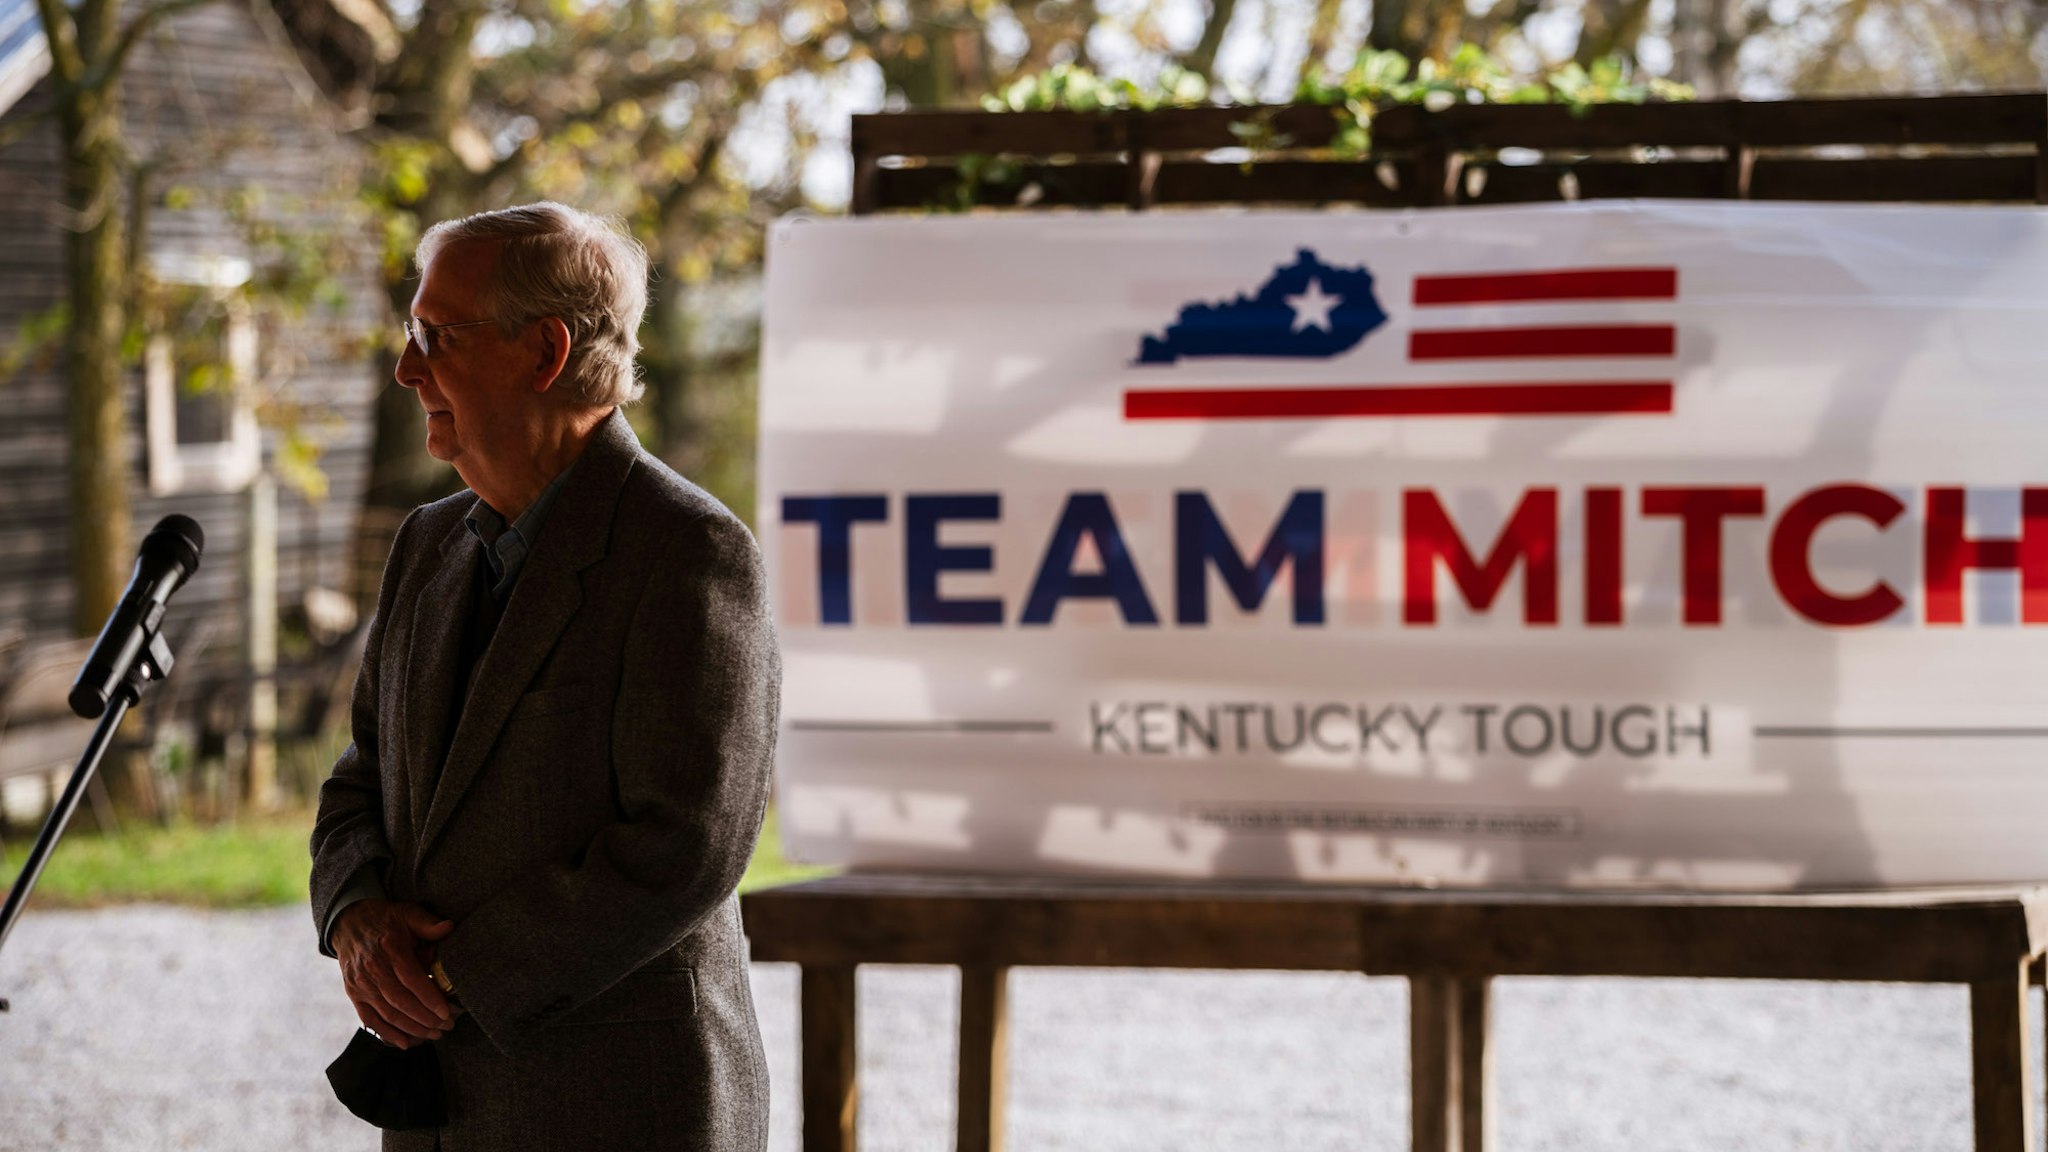 U.S. Senate Majority Leader Sen. Mitch McConnell (R-KY) , stands and speaks to the press and his supporters during a campaign stop on October 28, 2020 in Smithfield, Kentucky. McConnell is running against Democratic U.S. Senate candidate Amy McGrath in next weeks general election. (Photo by Jon Cherry/Getty Images)